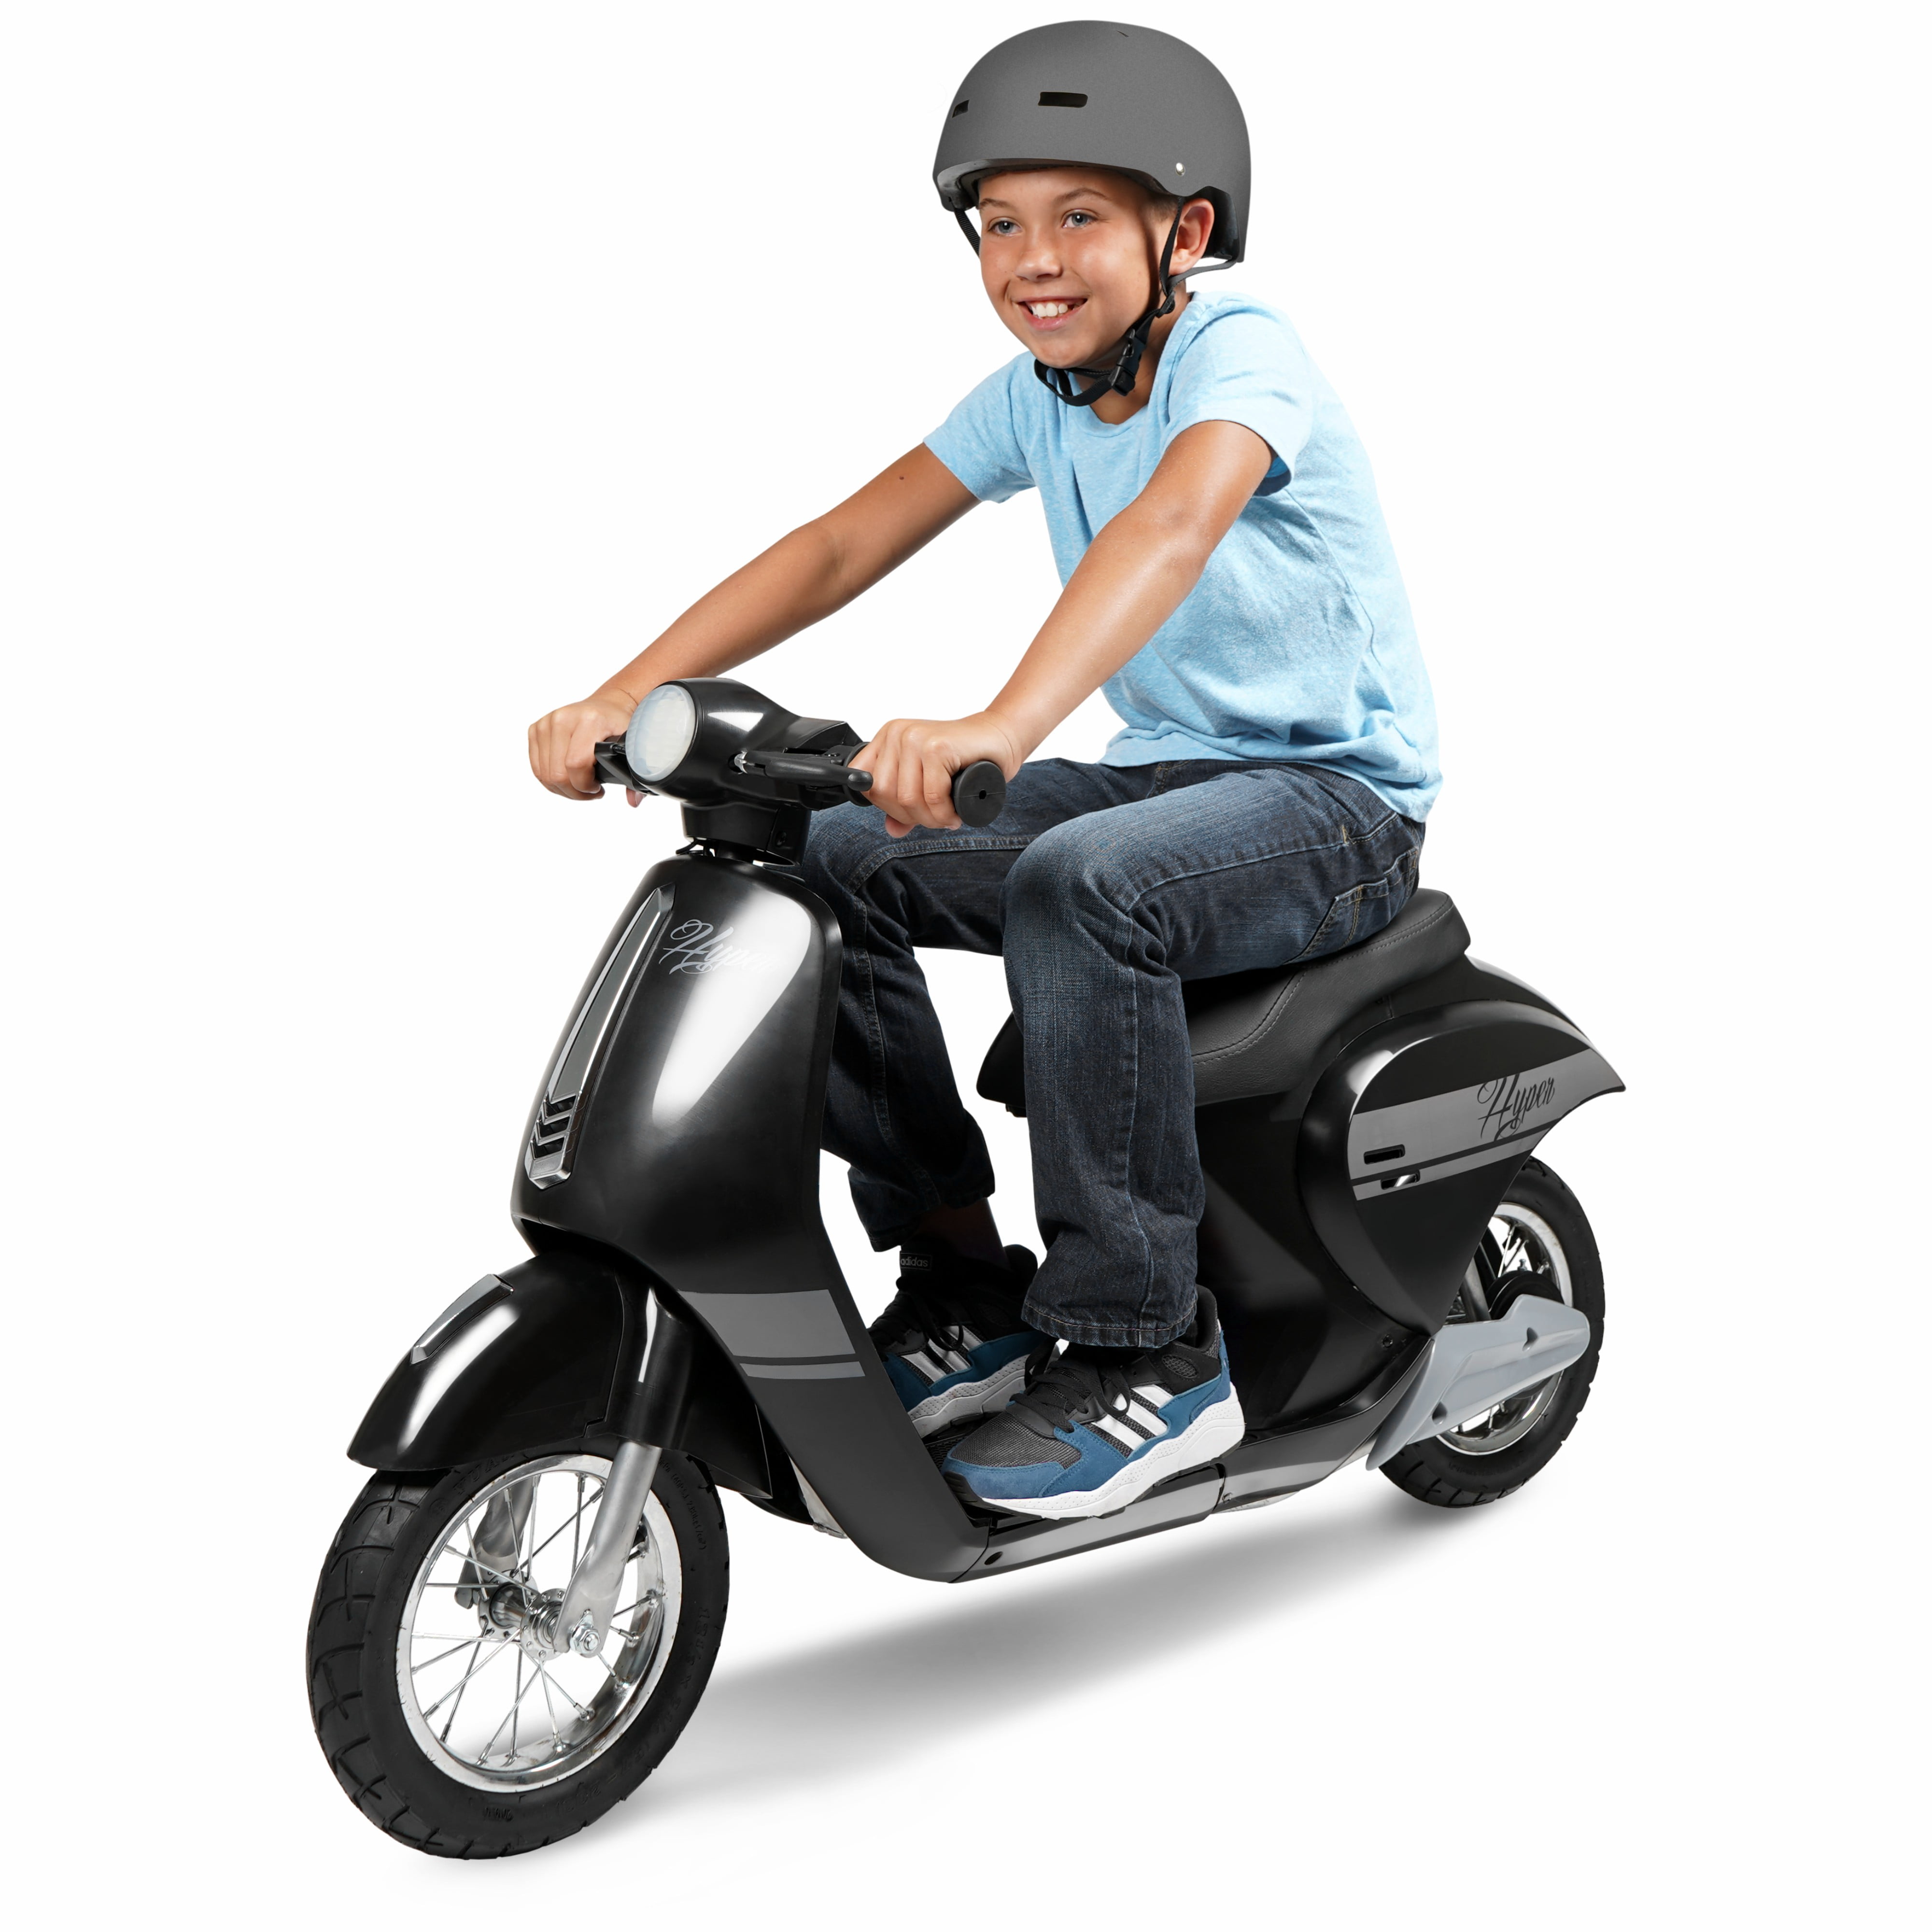 Hyper Toys Retro Scooter, Black, Battery Powered Electric Scooter with Easy Twist Throttle - Walmart.com